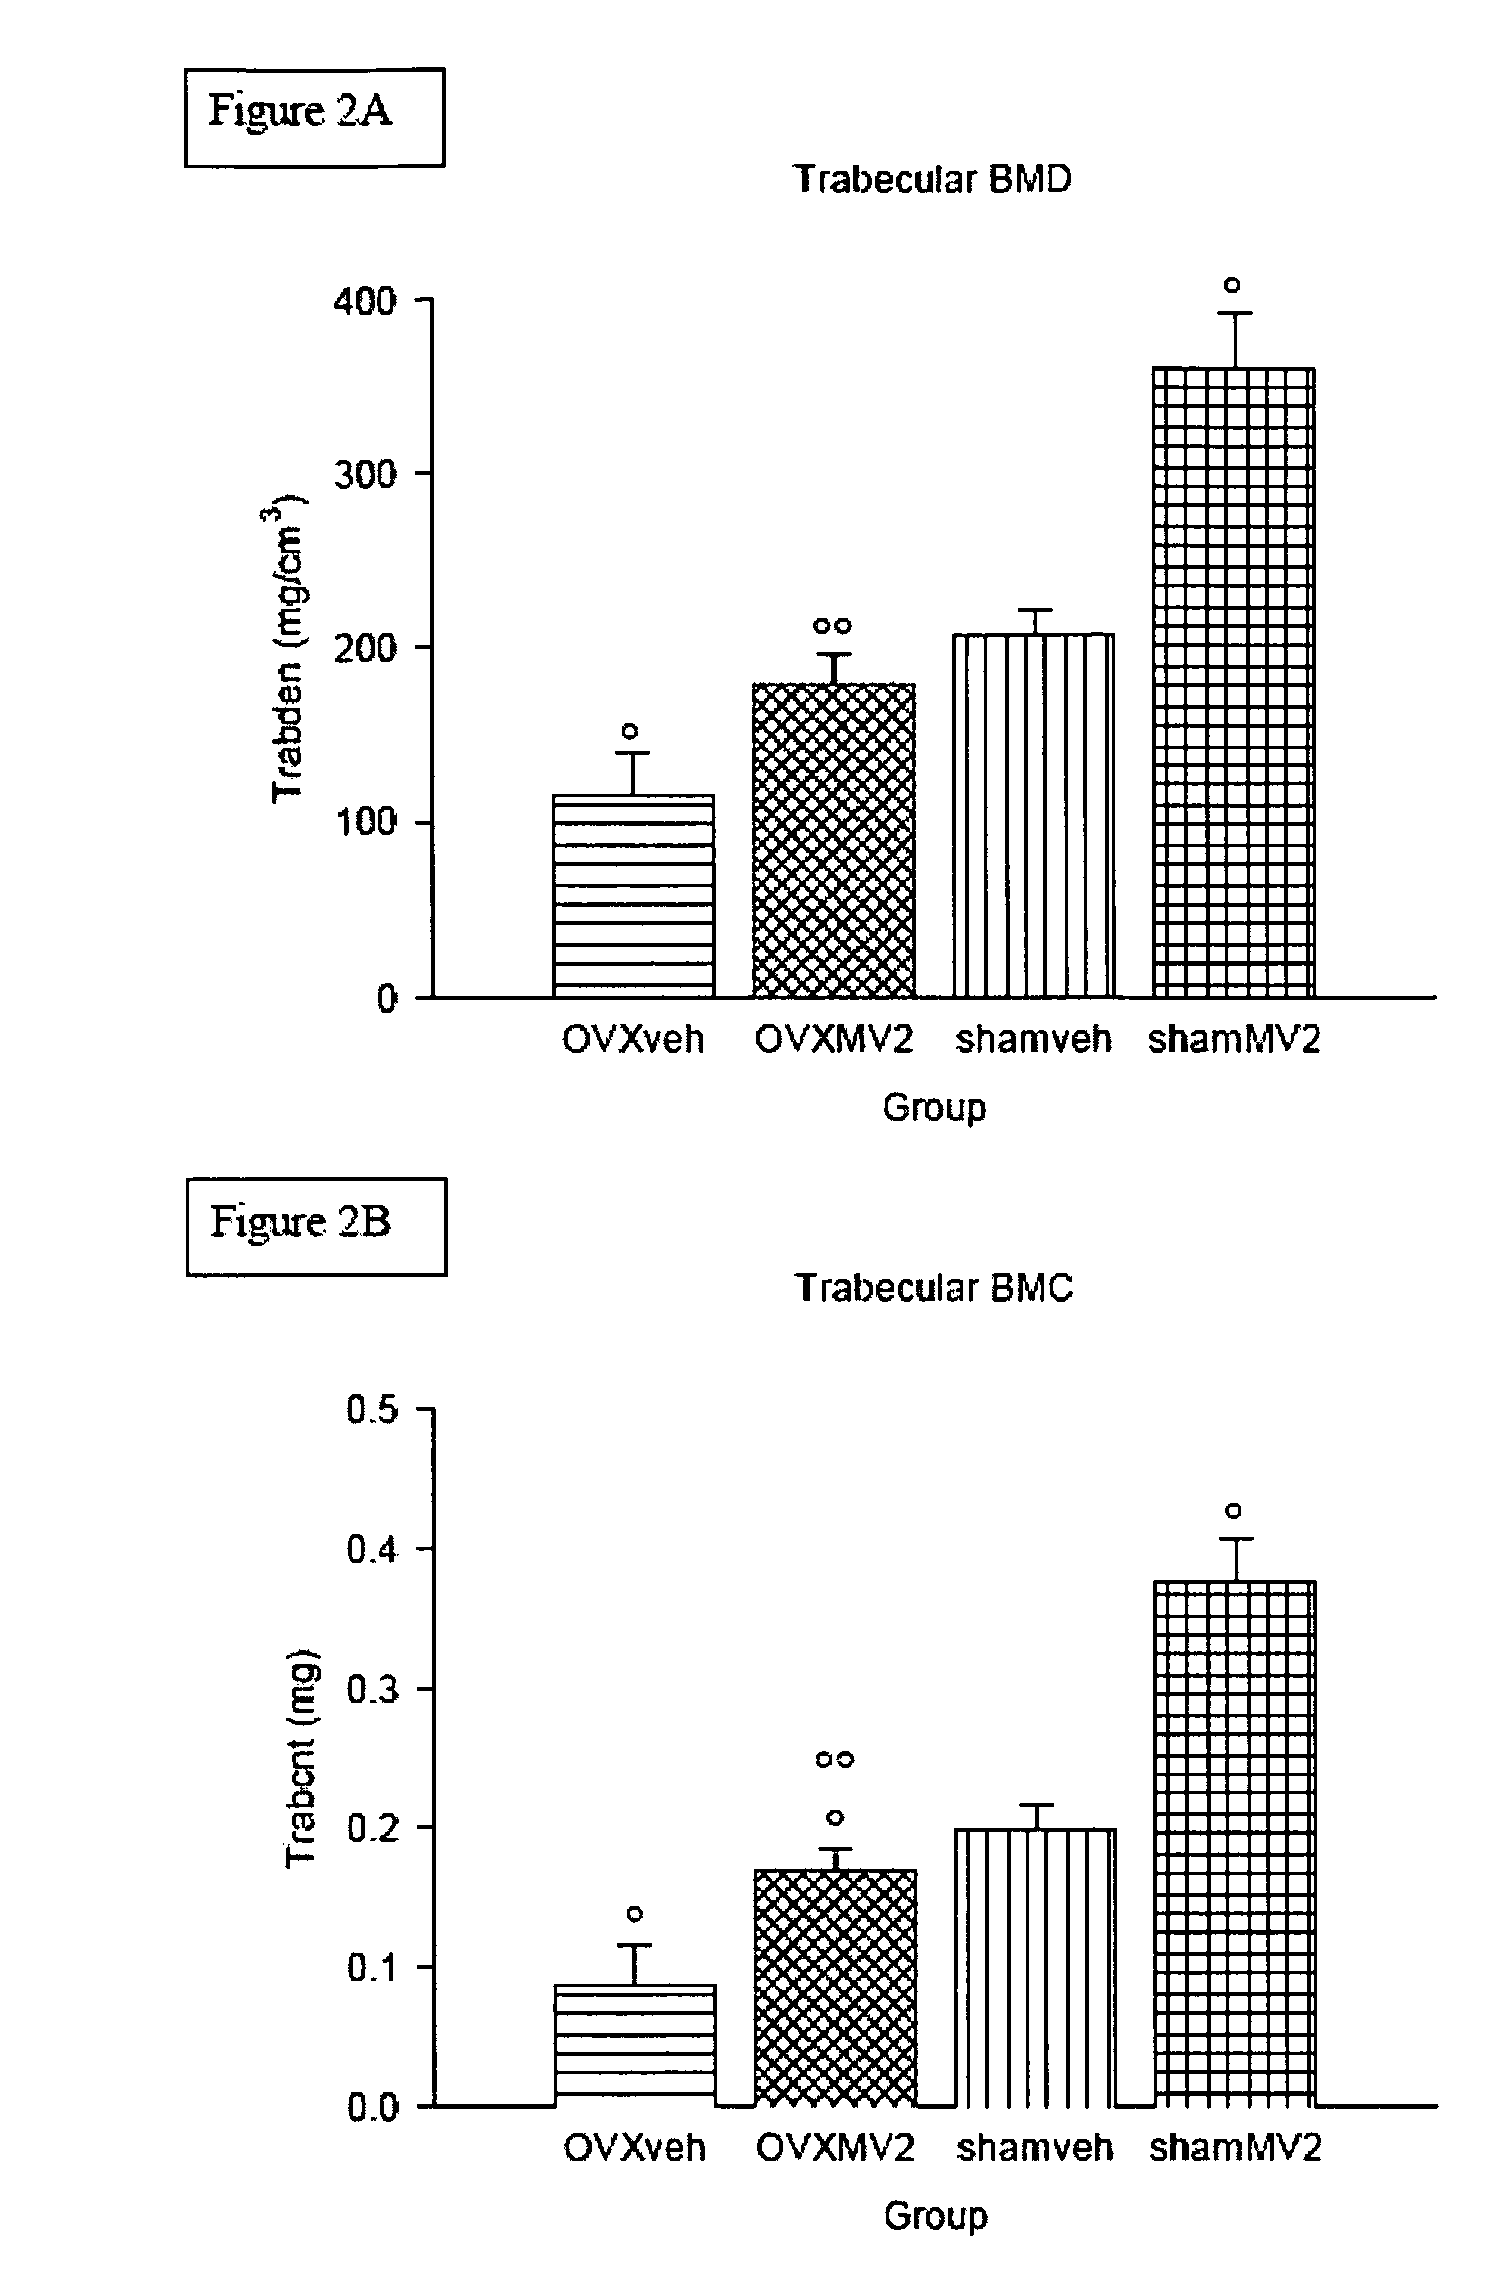 Vitamin D<sub>3 </sub>analogues for the prevention and treatment of bone disorders